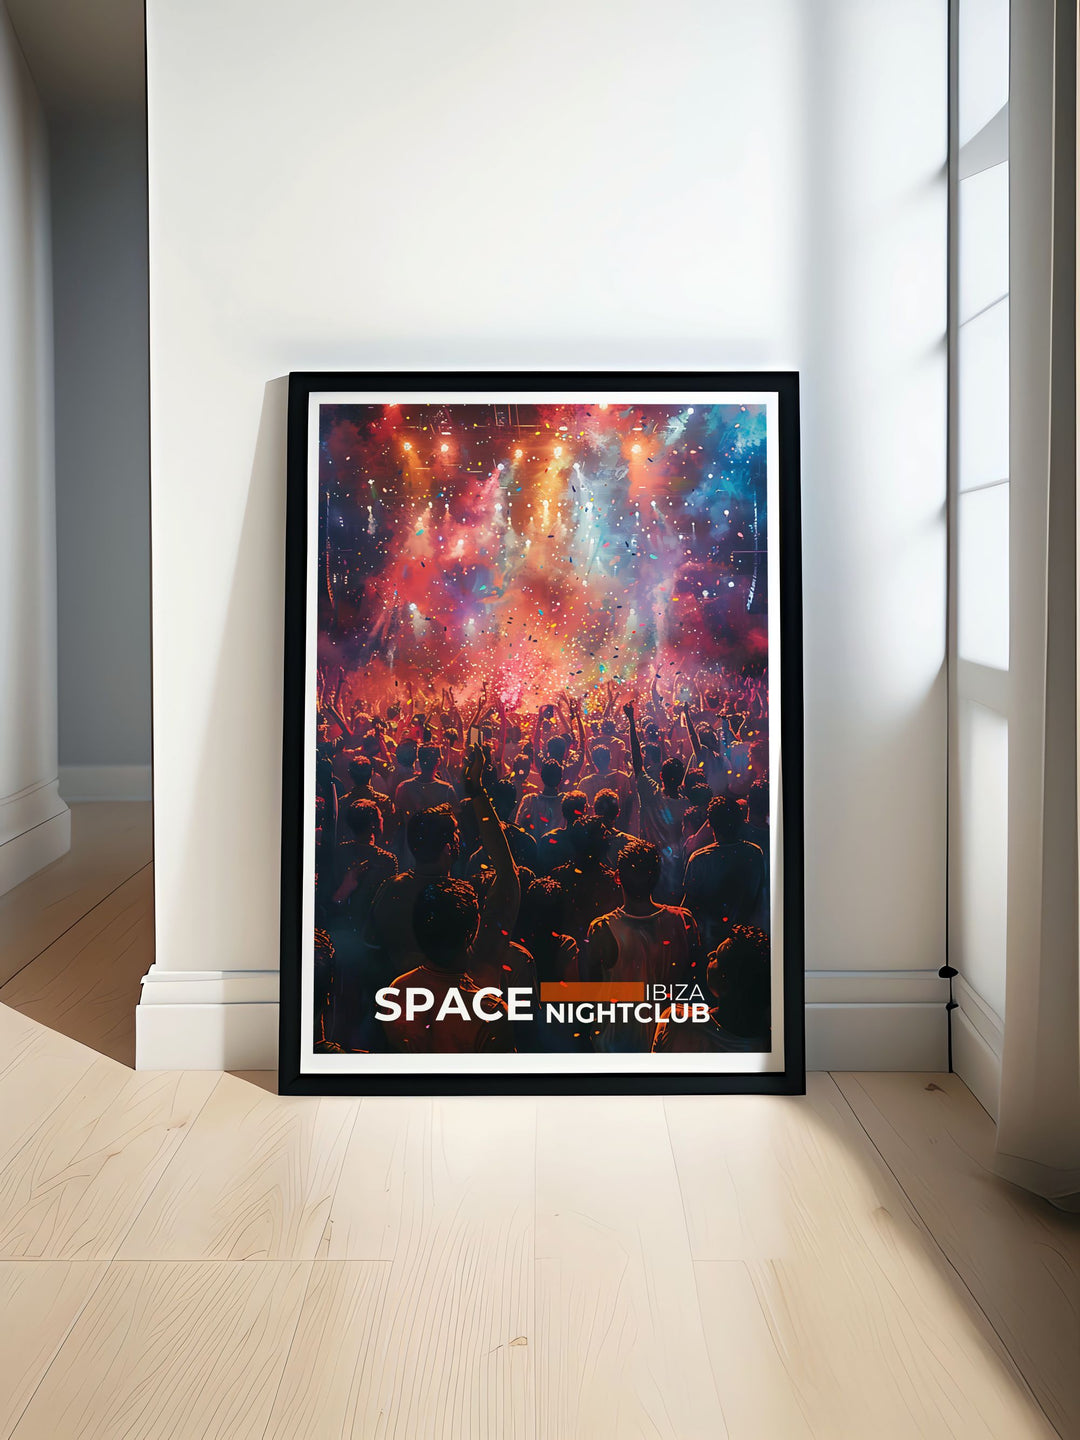 A vibrant depiction of Space Nightclub, showcasing the lively atmosphere and iconic architecture that make it a legendary venue in Ibiza.